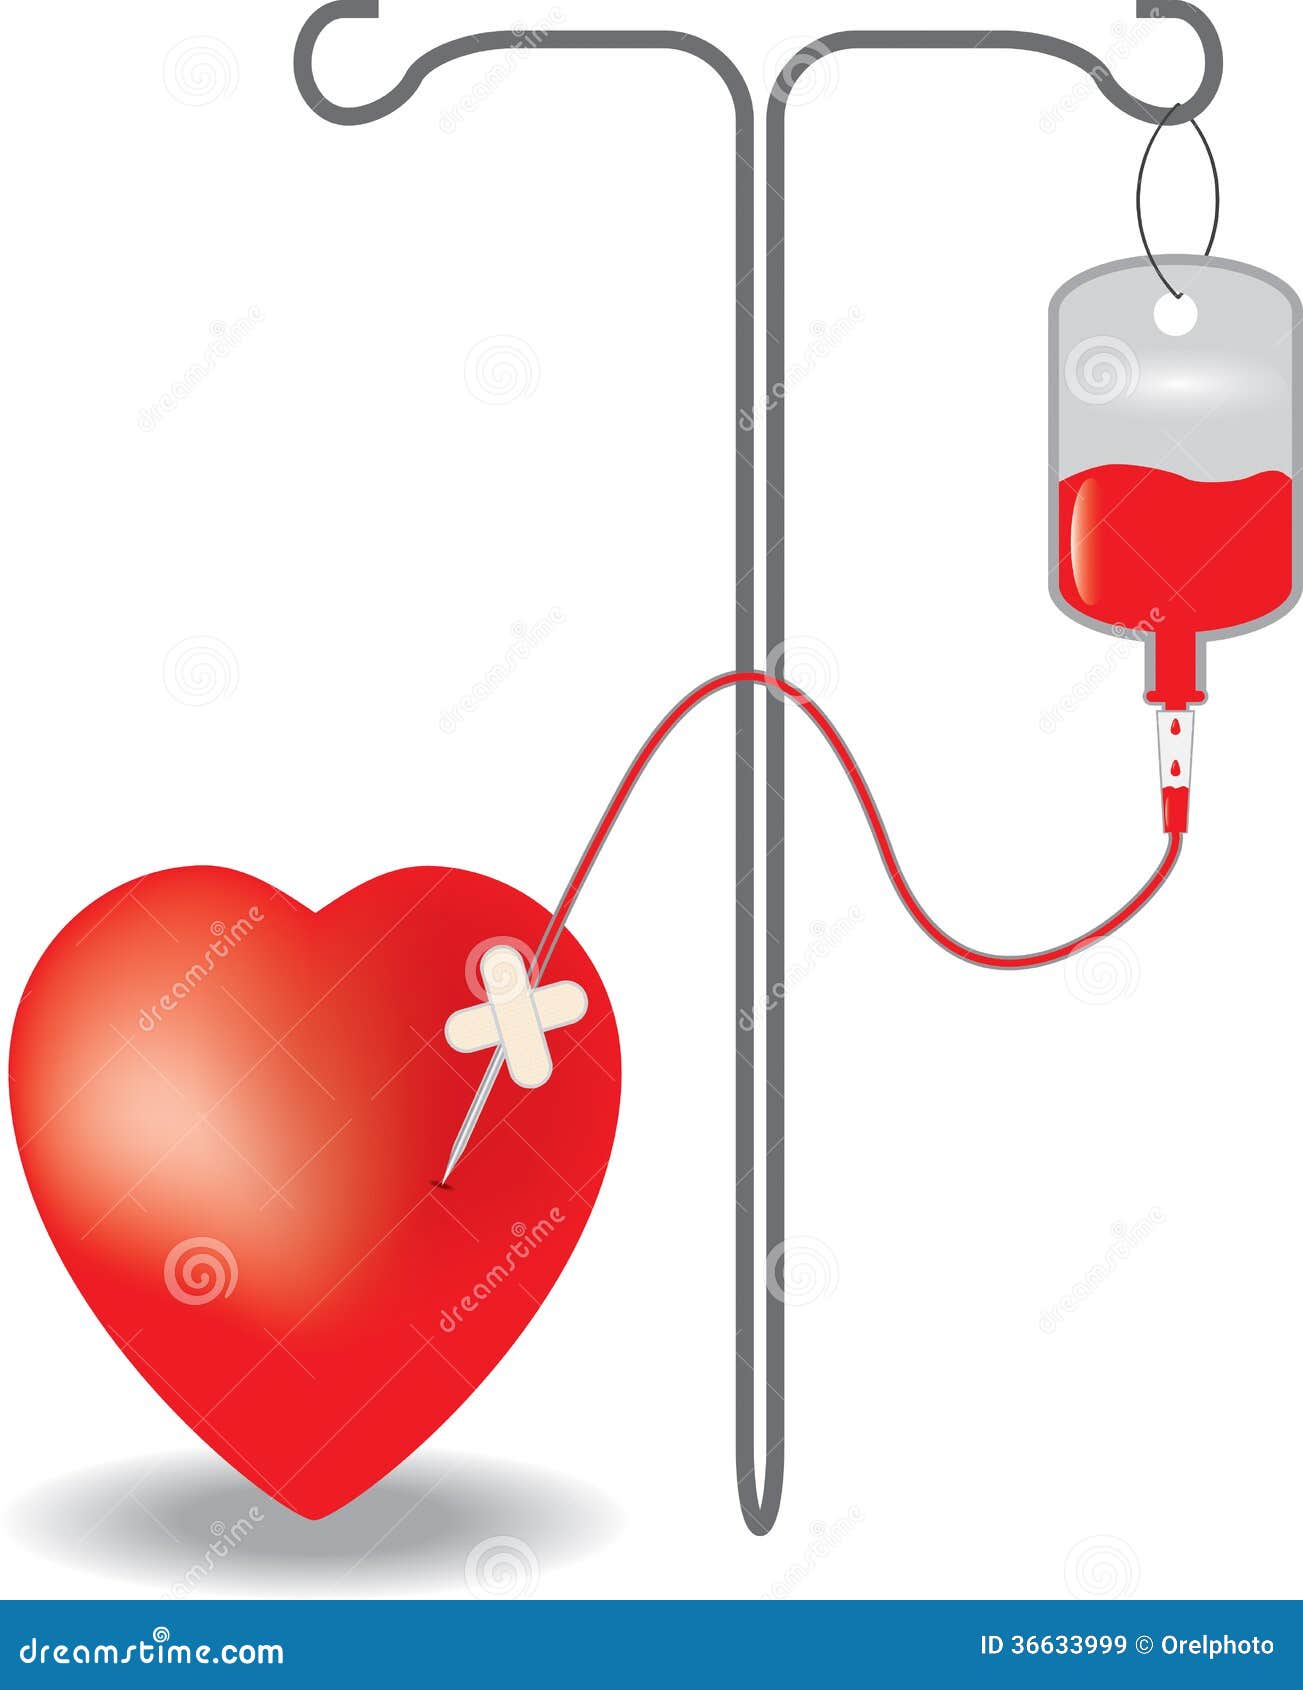 blood donation clipart - photo #33